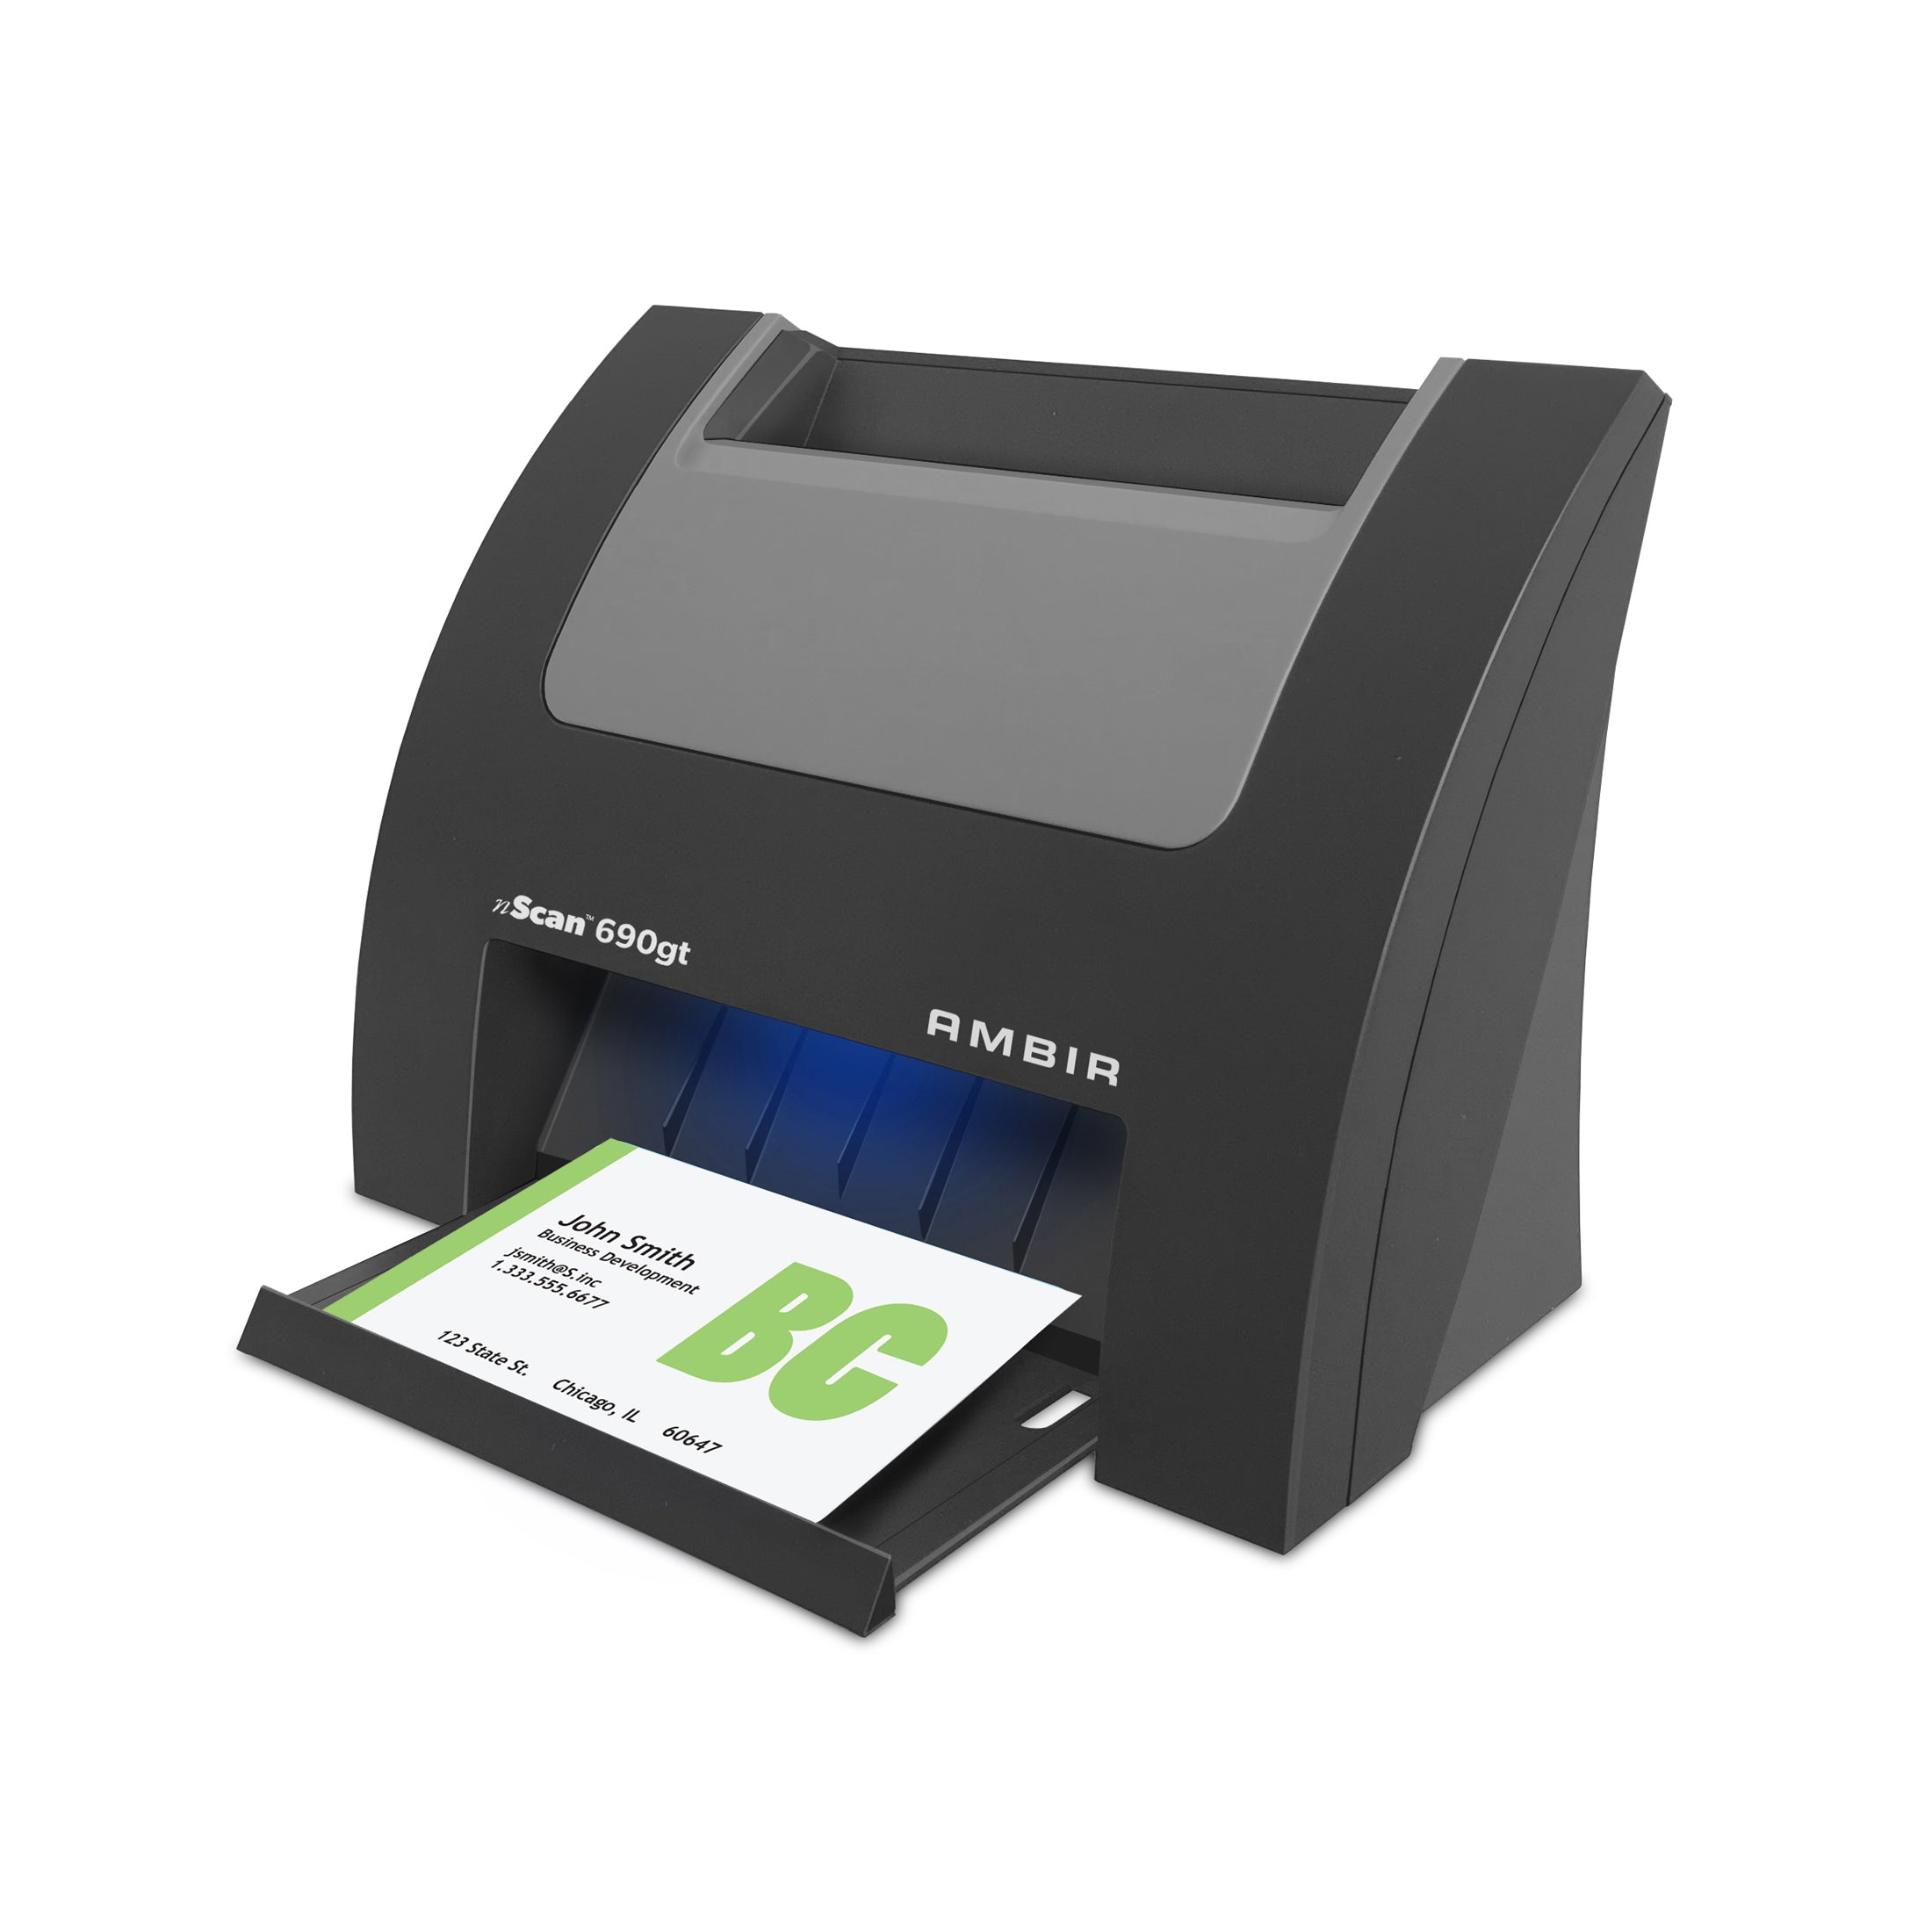 nScan 690gt Duplex ID Card Scanner with AmbirScan Business Card (DS690GT-BCS)